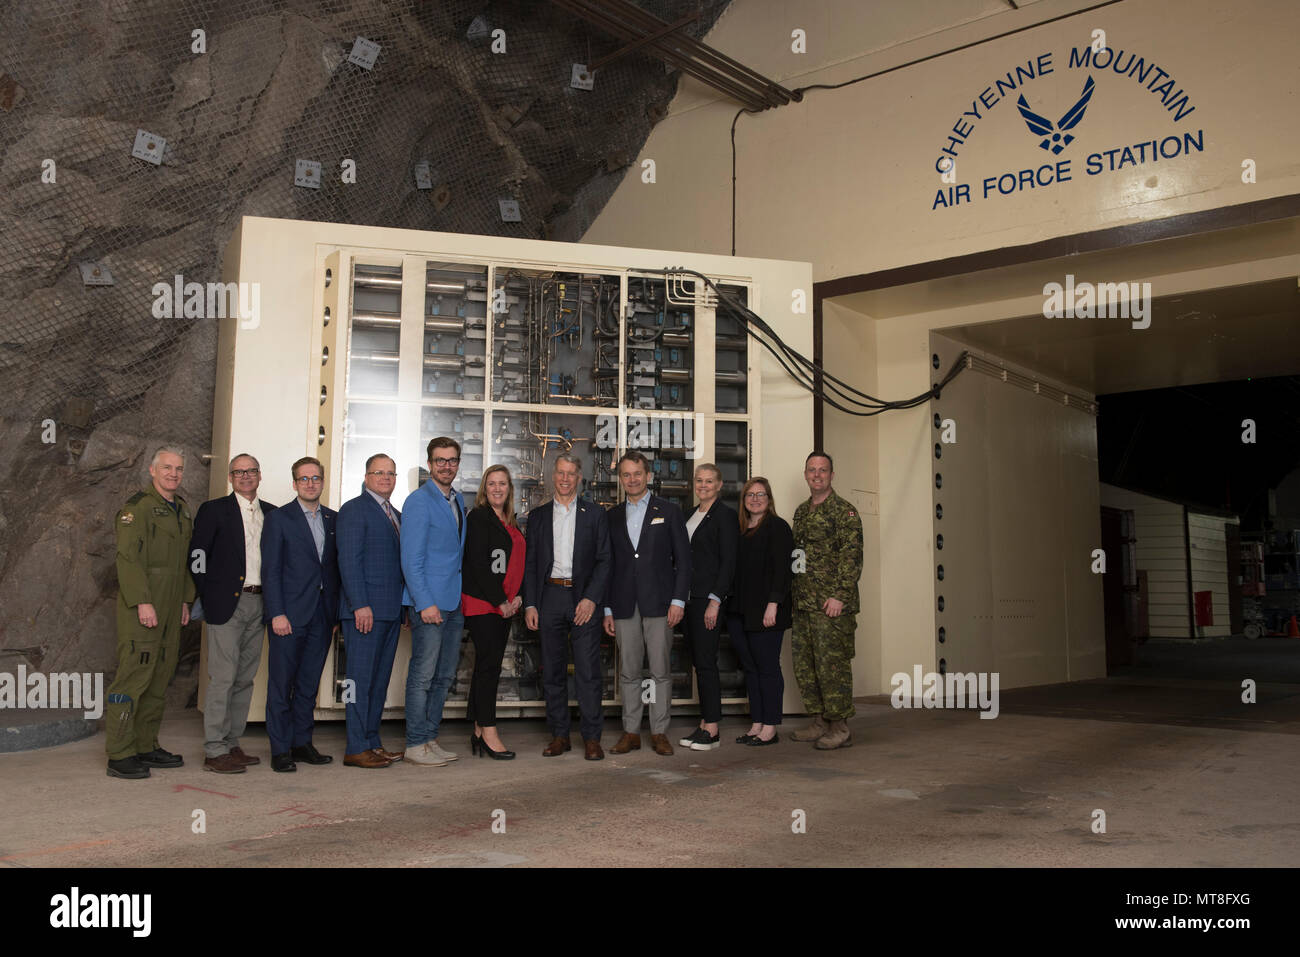 CHEYENNE MOUNTAIN AIR FORCE STATION, Colo.—The Honourable Seamus O’Regan (fourth from right), Canadian minister of veteran affairs, The Honourable Andrew Leslie (fifth from right), Canadian parliamentary secretary to the minister of foreign affairs, Jody Thomas (third from right), deputy minister of national defence, and Stephane Lessard (fourth from left), consul general of Canada, and their team arrived for a tour of Cheyenne Mountain Air Force Station, Colorado, May 11, 2018. Distinguished Canadian representatives came to Colorado to celebrate the 60th anniversary of the North American Aero Stock Photo